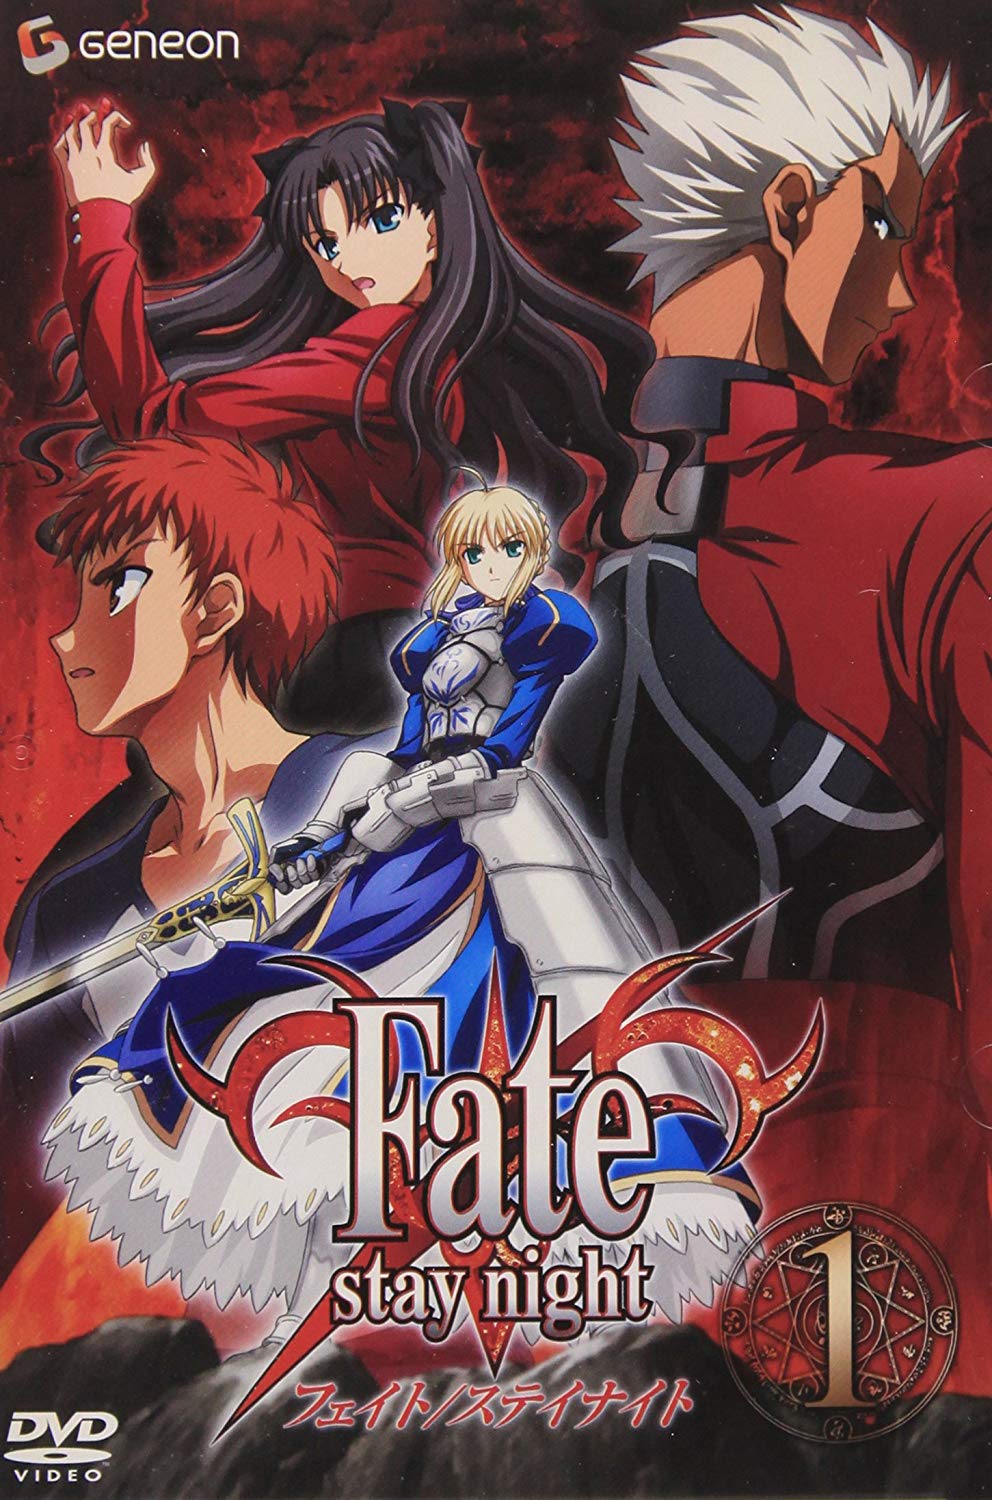 Fate/stay night [Unlimited Blade Works]発送に関して